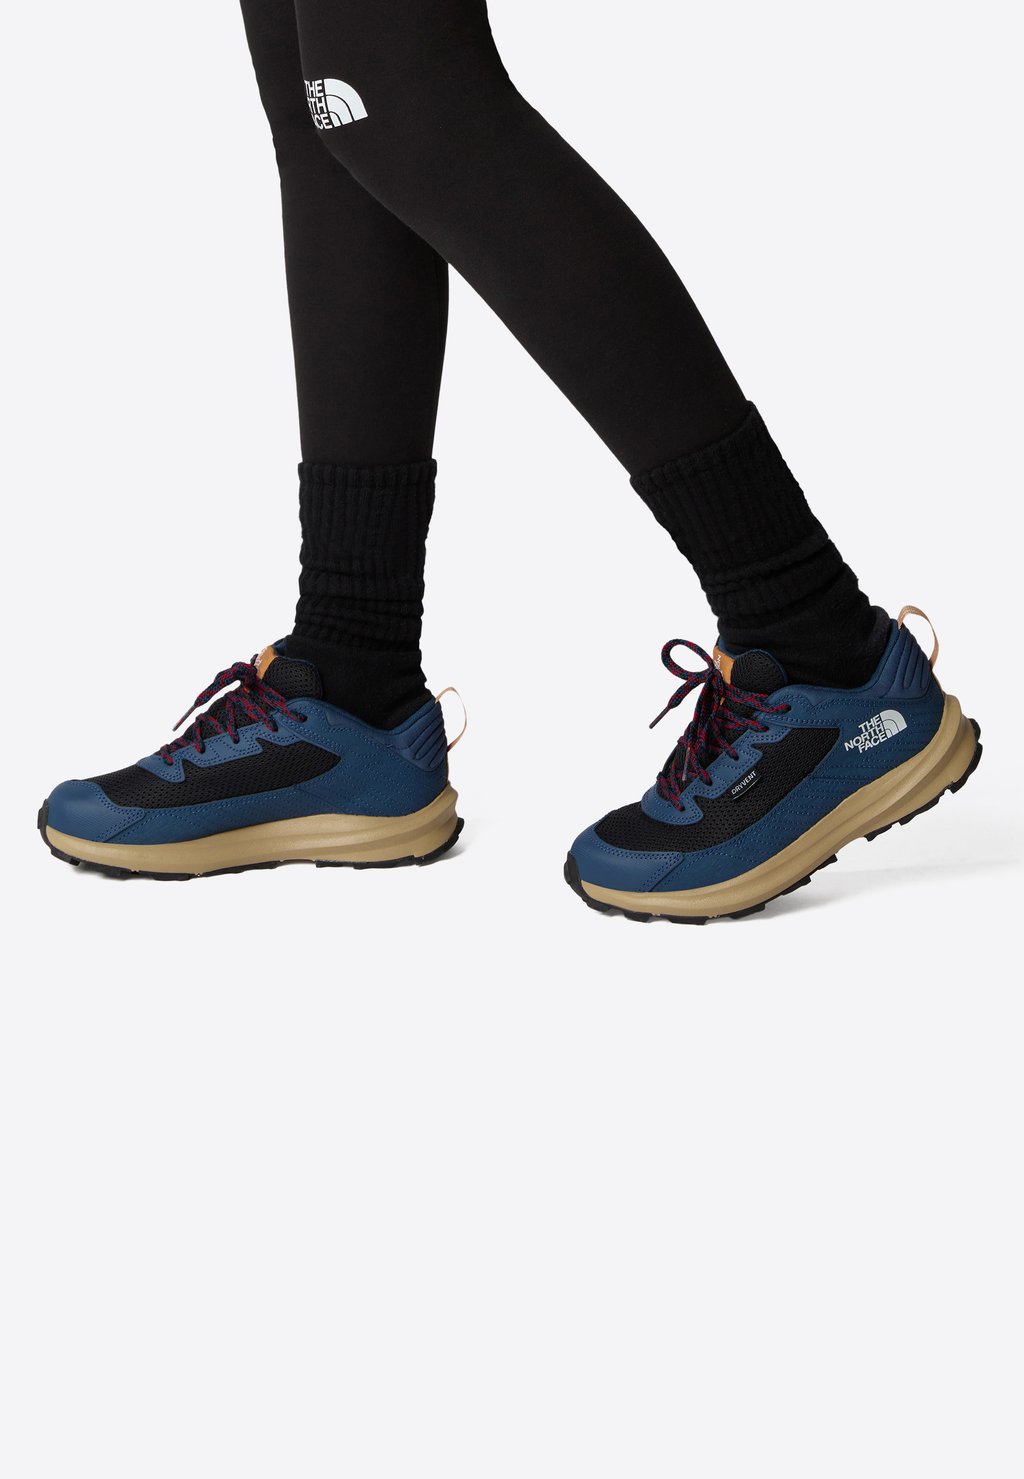 Низкие кроссовки Y Fastpack Hiker Wp The North Face, цвет shady blue/tnf white рюкзак women s surge the north face цвет shady blue tnf black